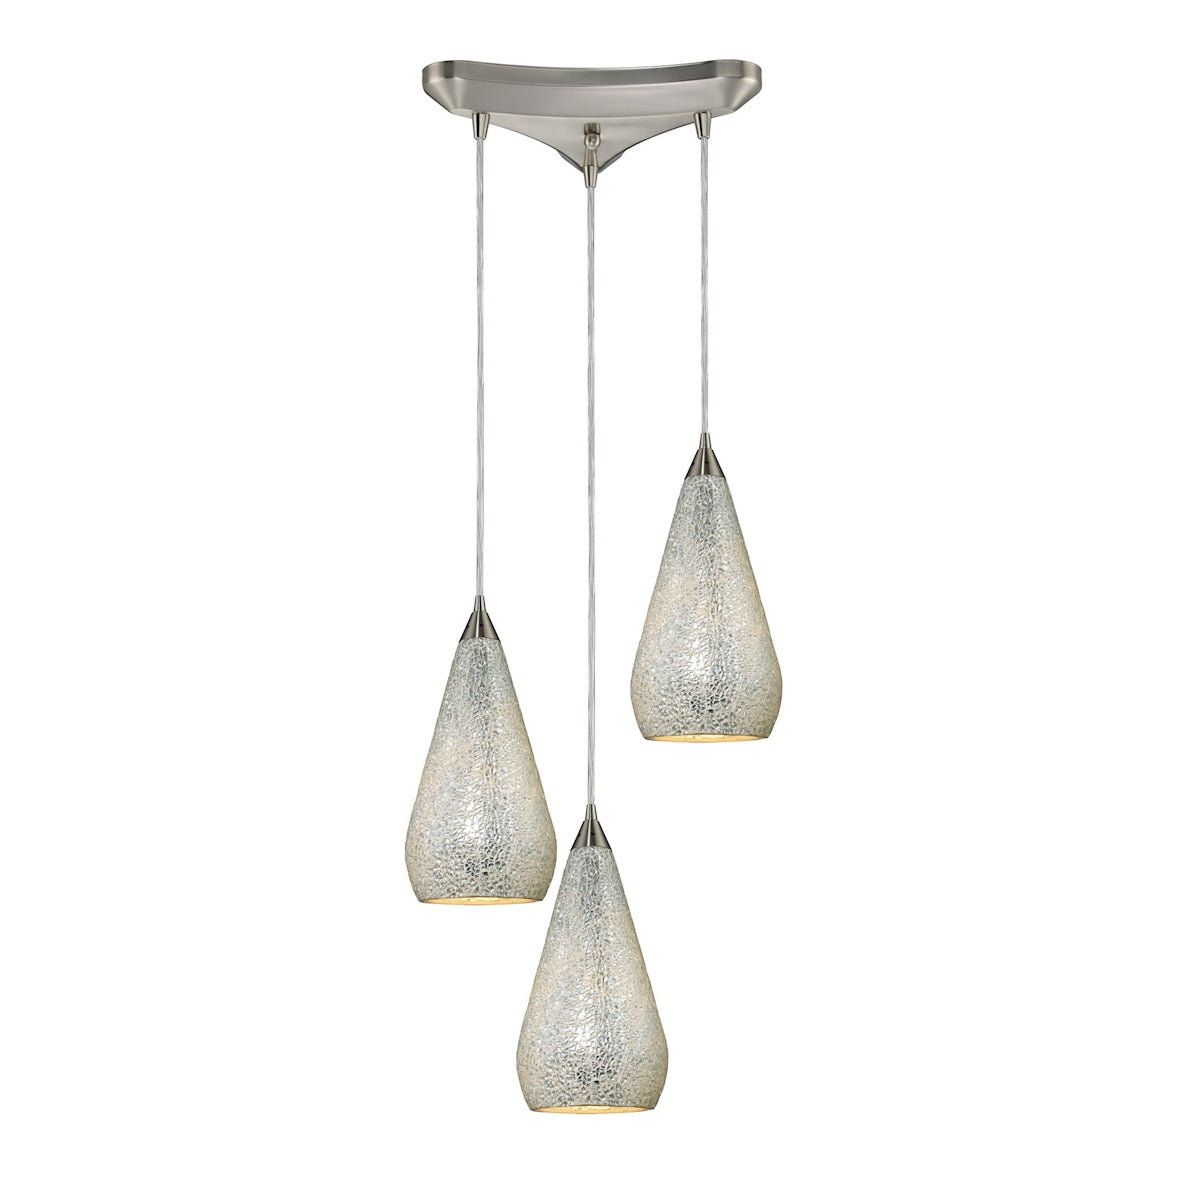 ELK Lighting 546-3SLV-CRC Curvalo 3-Light Triangular Pendant Fixture in Satin Nickel with Silver Crackle Glass